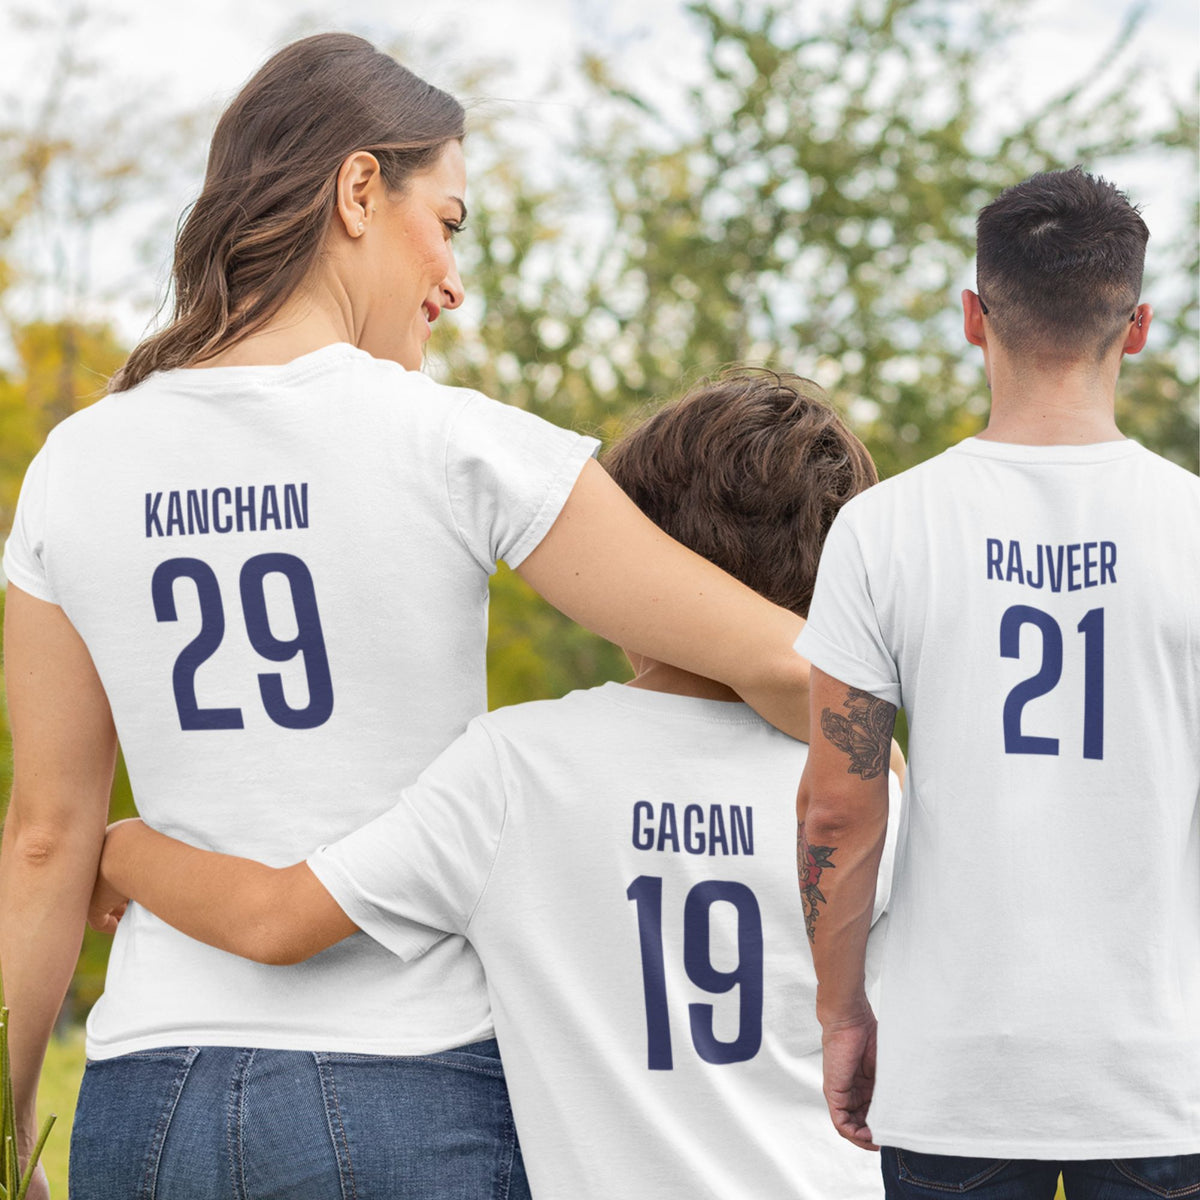 personalized-name-and-birth-date-matching-family-white-t-shirts-for-mom-dad-son-daughter-gogirgit-com